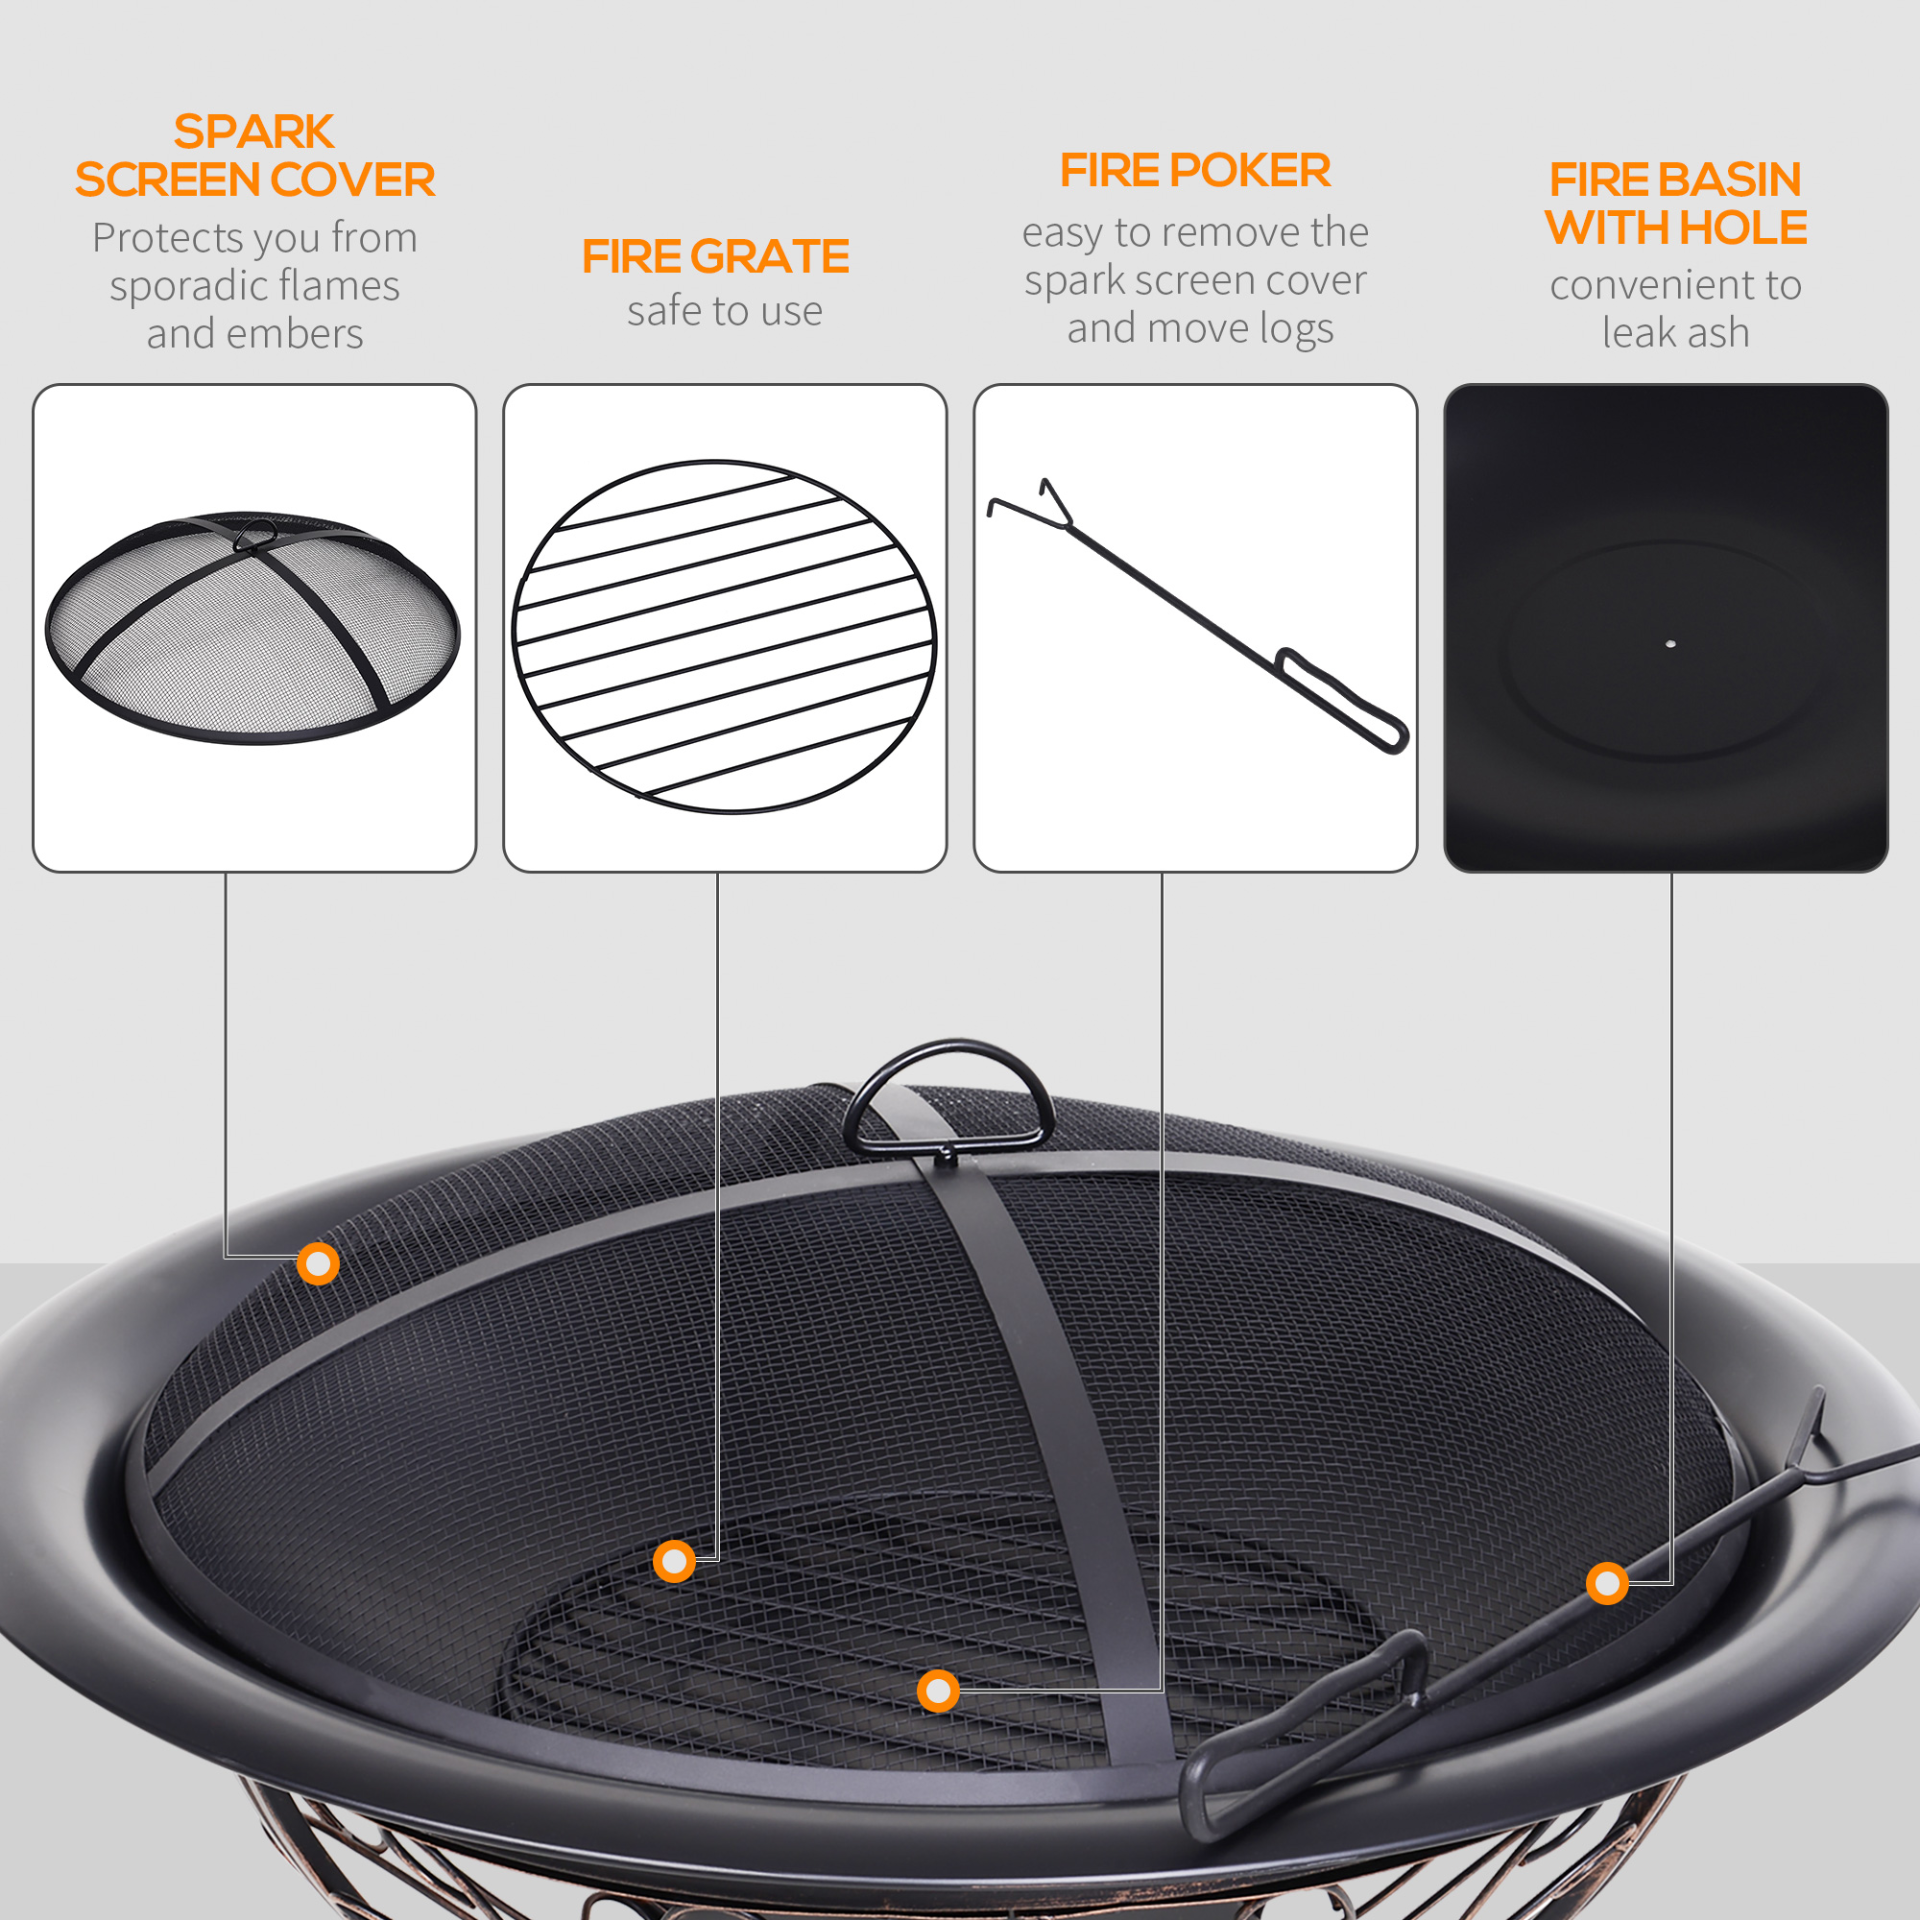 Outsunny Metal Large Firepit Bowl Outdoor Round Fire Pit Brazier with Lid, Log Grate, Poker, Elegant Scrolls - 76 x 76 x 50cm, Black Firepit Cosy Camping Co.   